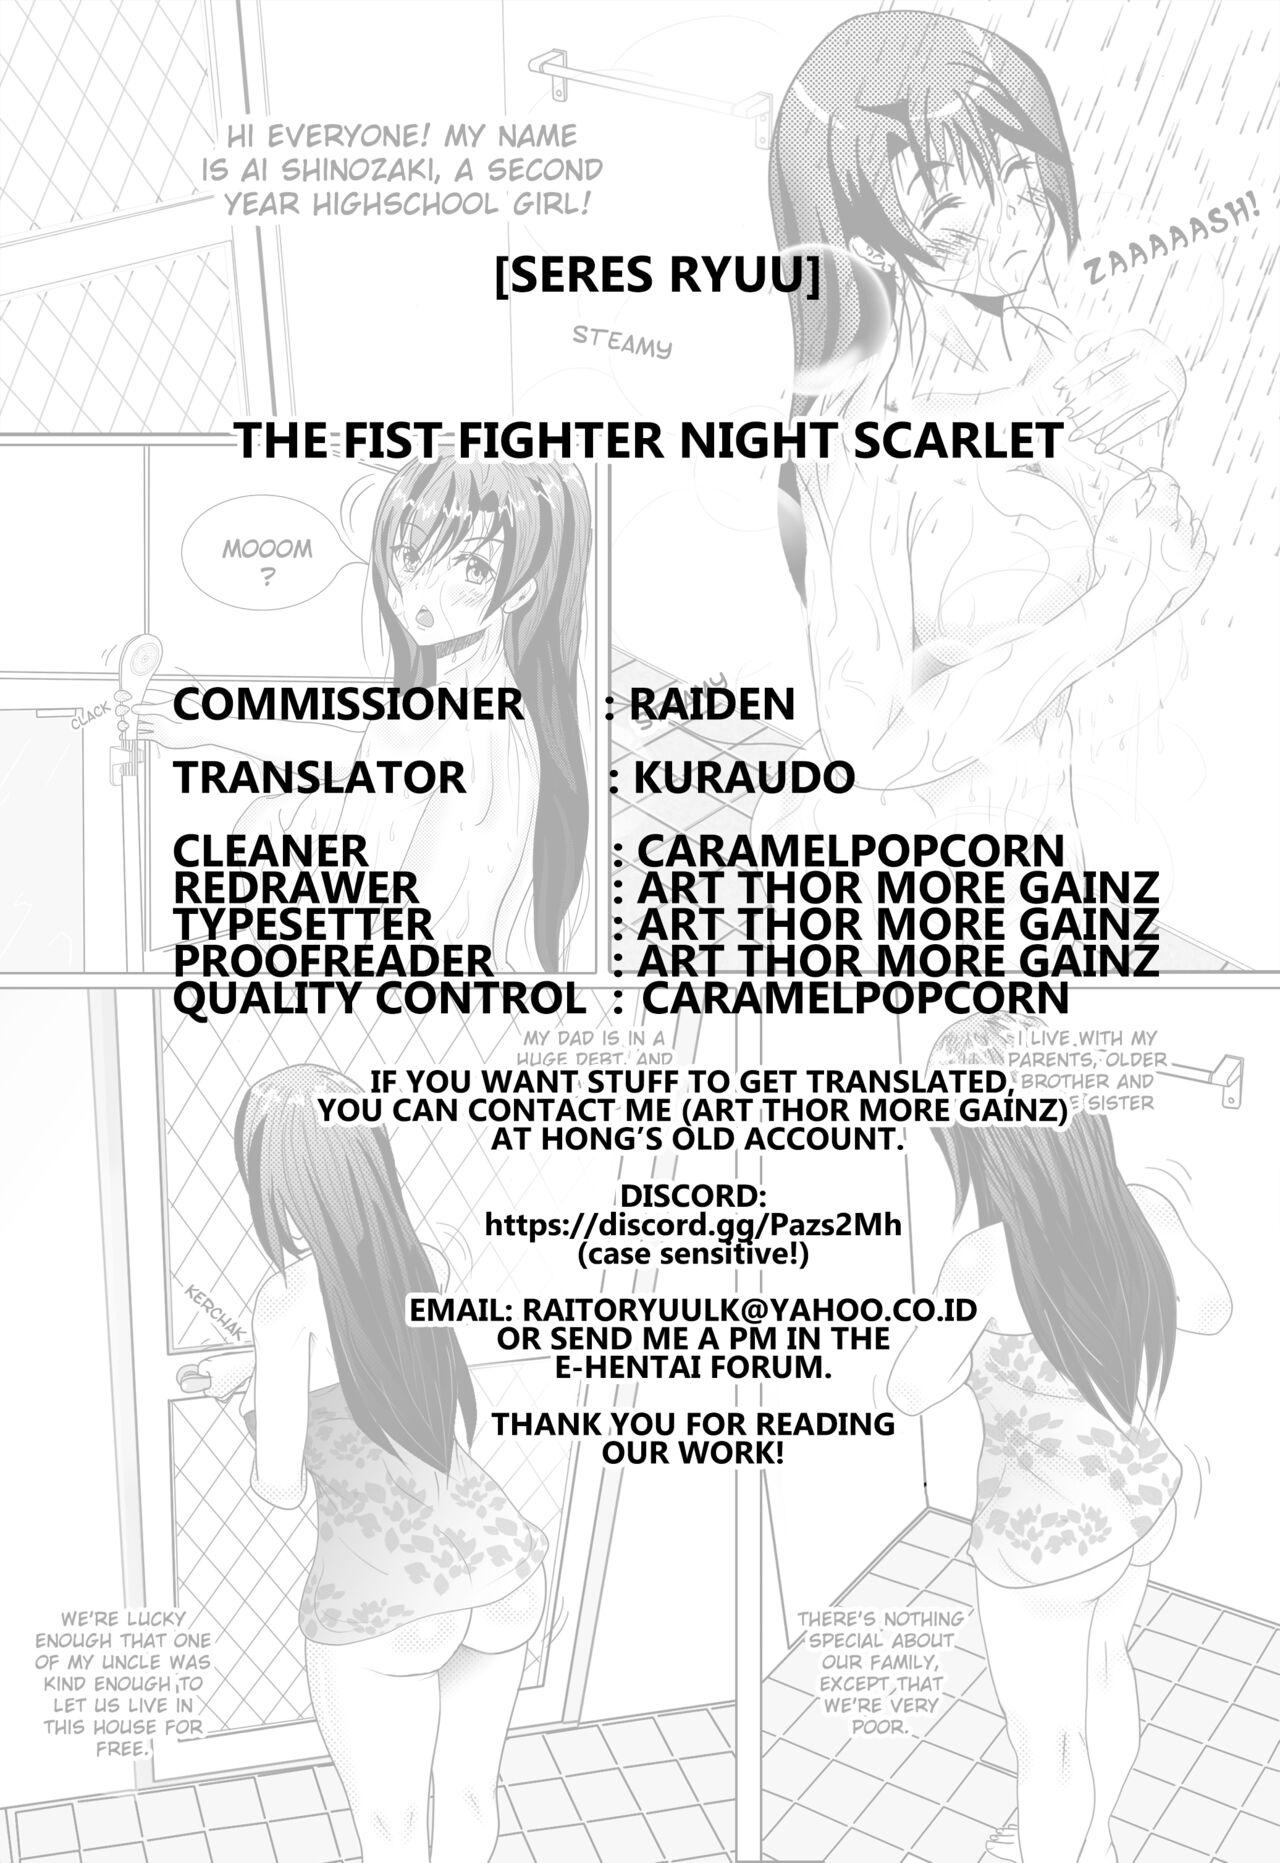 Uncut Yoru no Onna Kenshi Night Scarlet | The Fist Fighter Night Scarlet 2 Free Blowjob Porn - Page 11